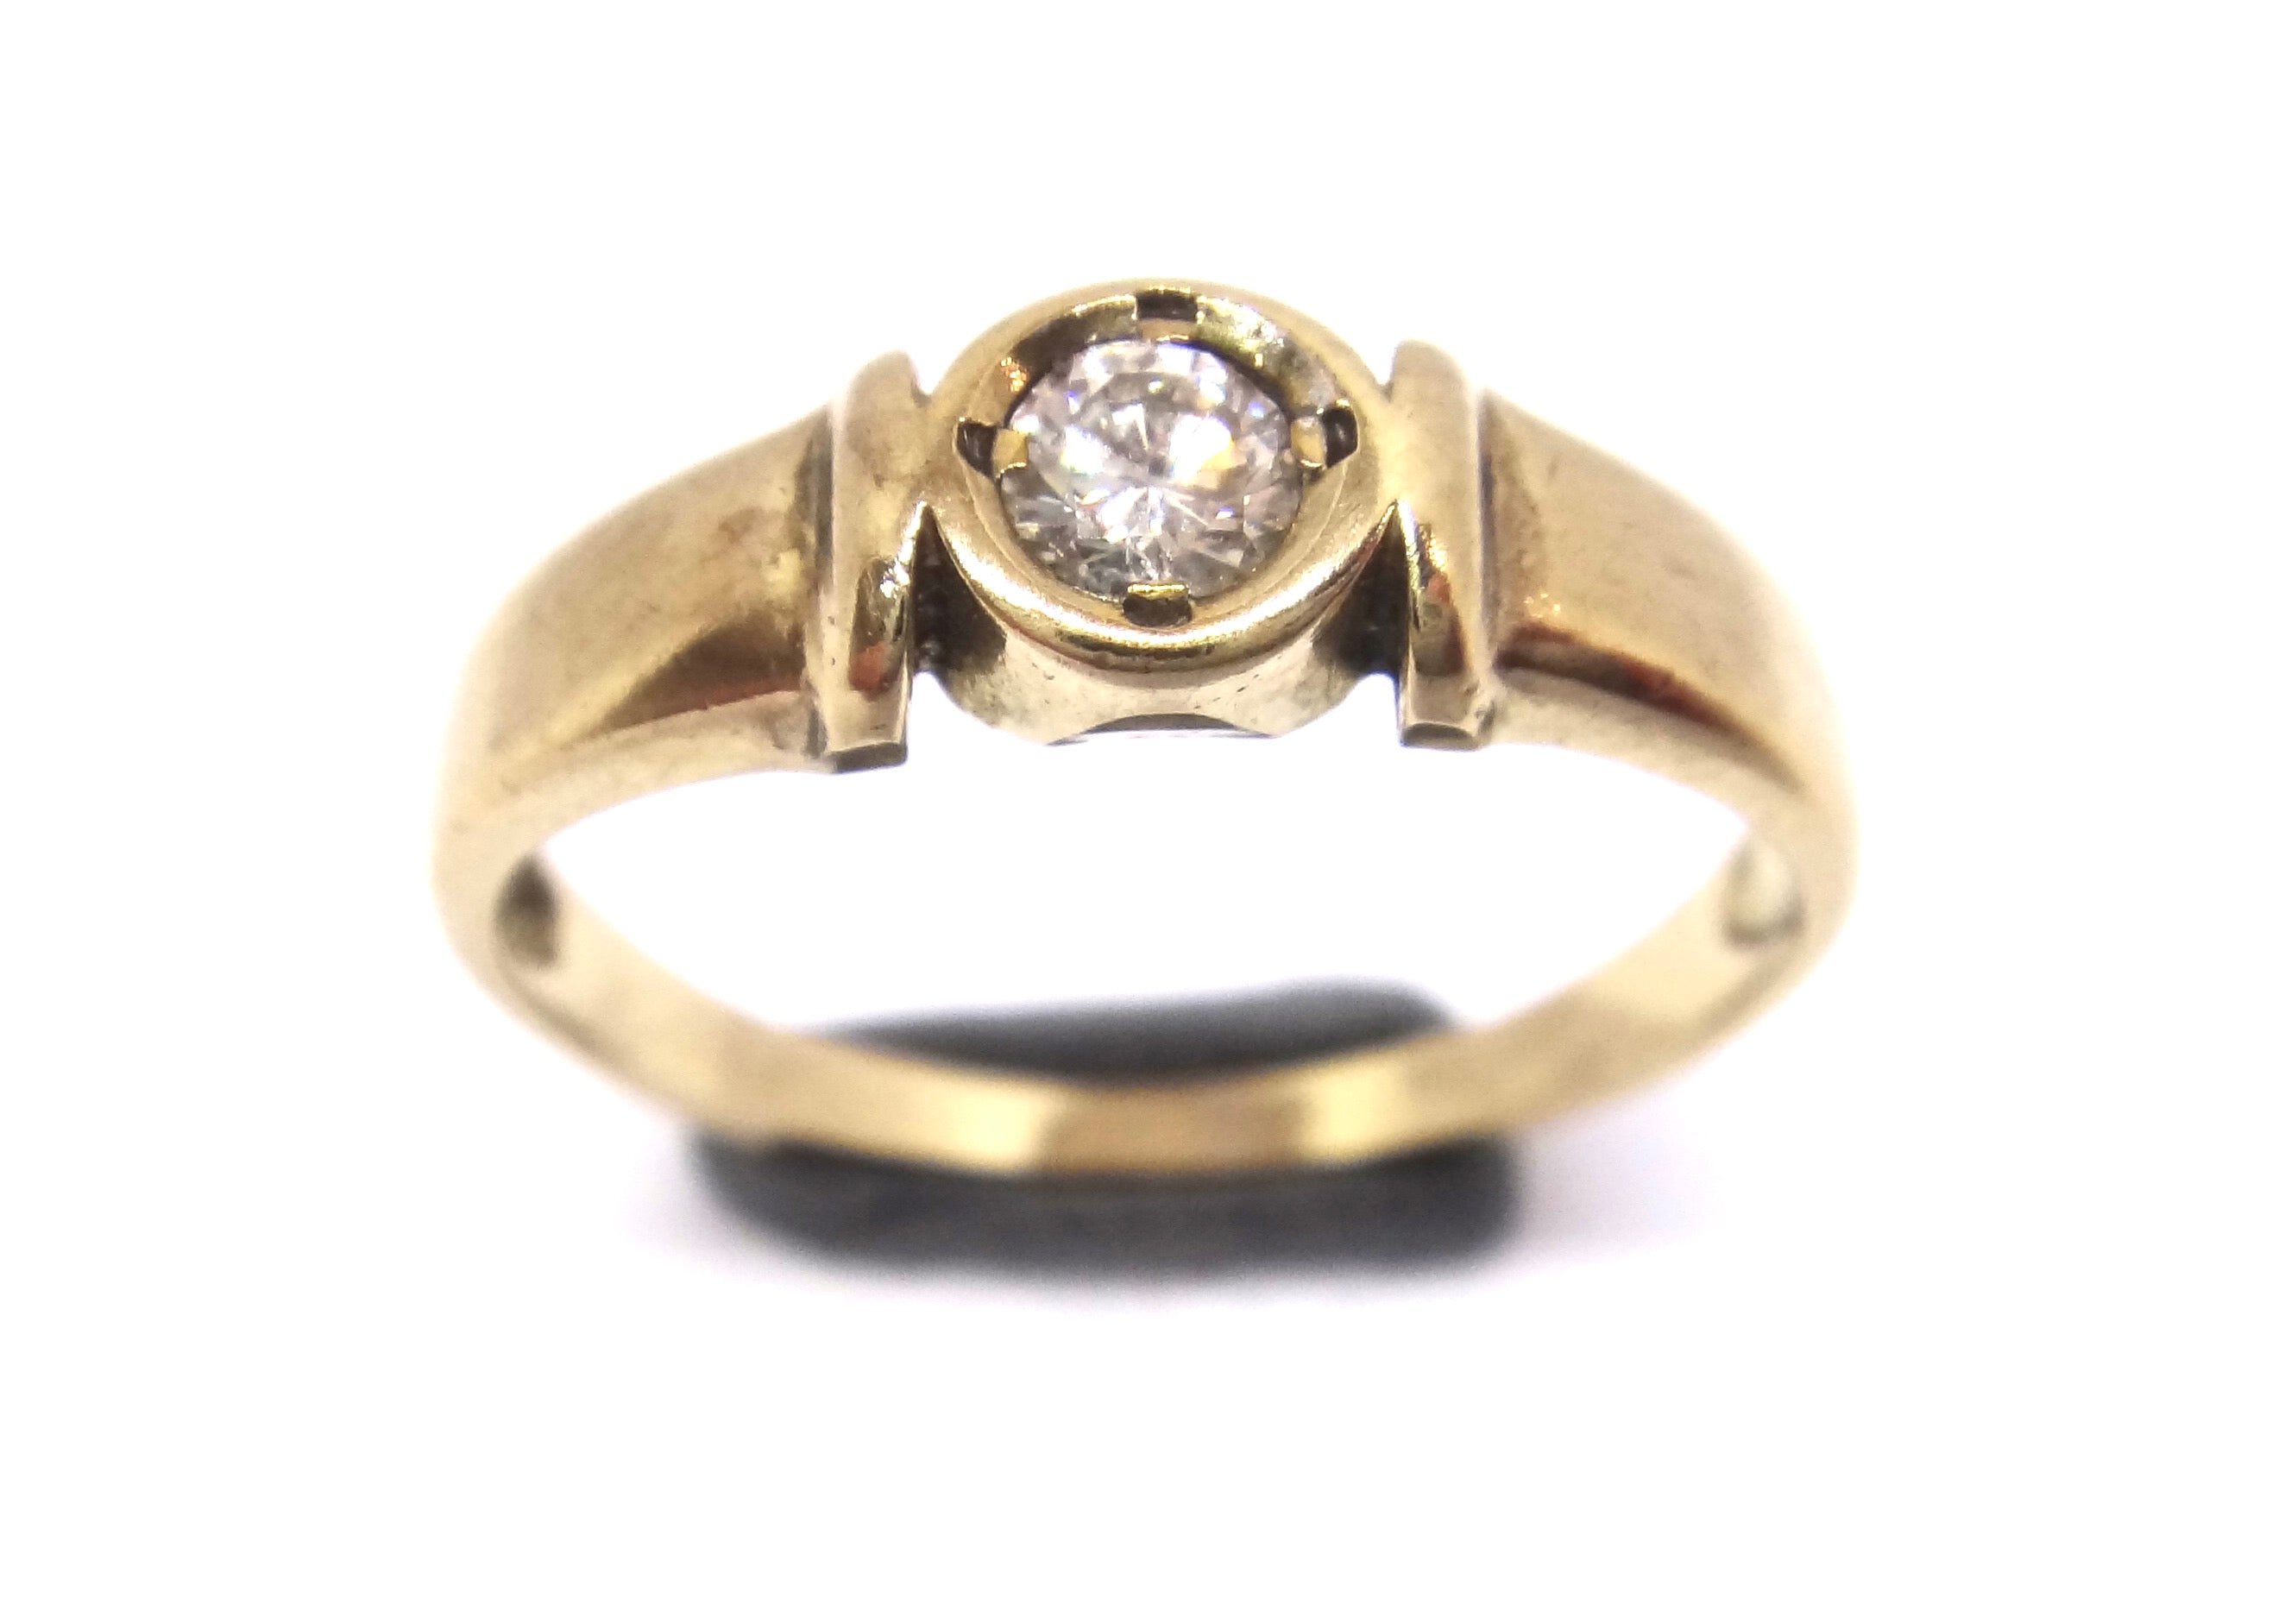 18CT GOLD & Collet Set Solitaire Diamond Ring